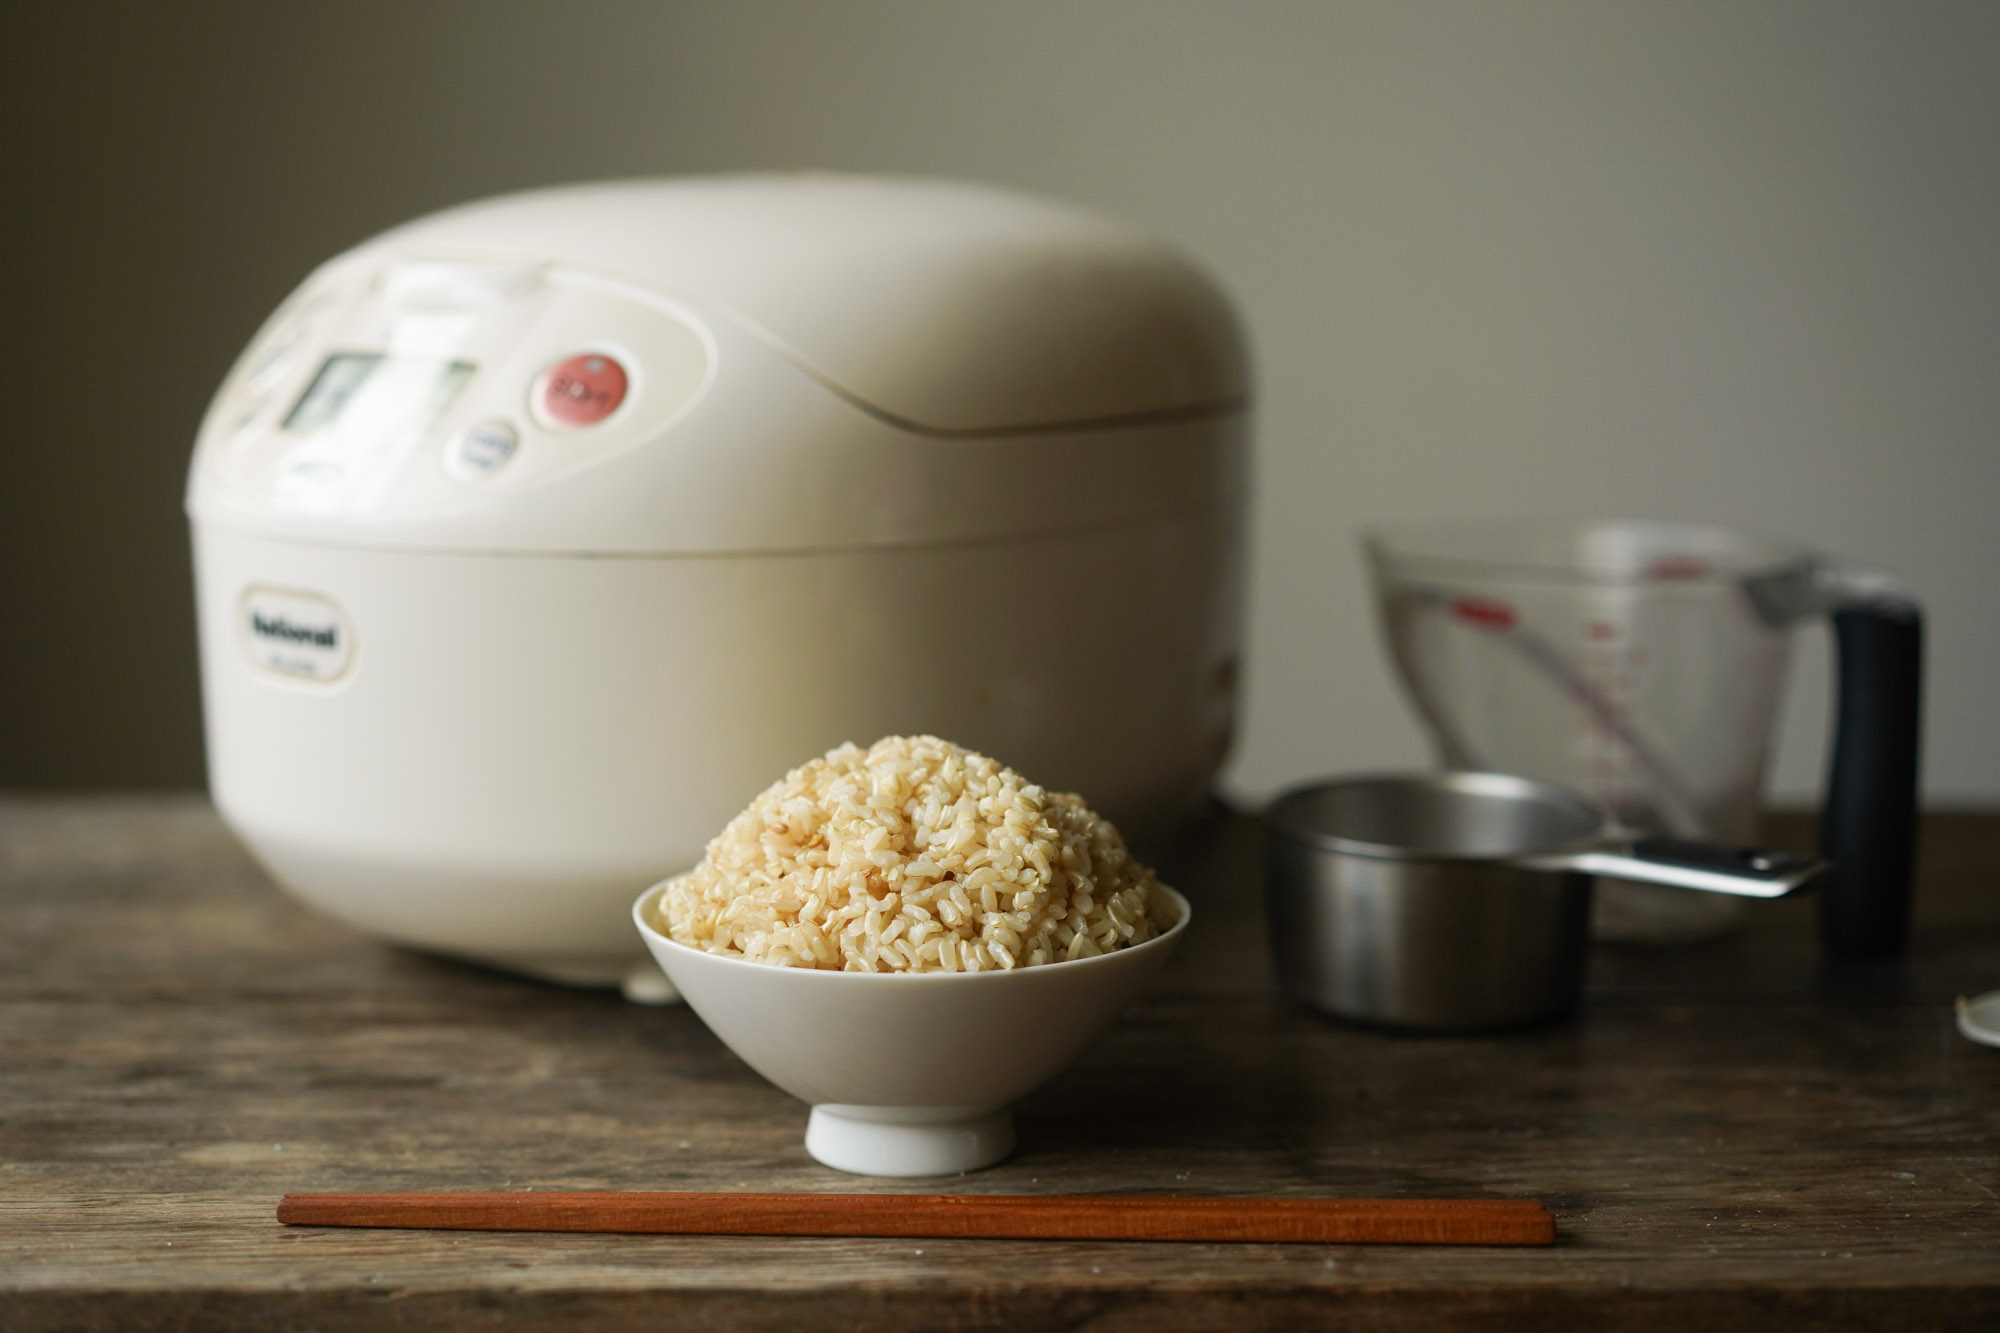 https://www.hungryhuy.com/wp-content/uploads/brown-rice-in-rice-cooker.jpg